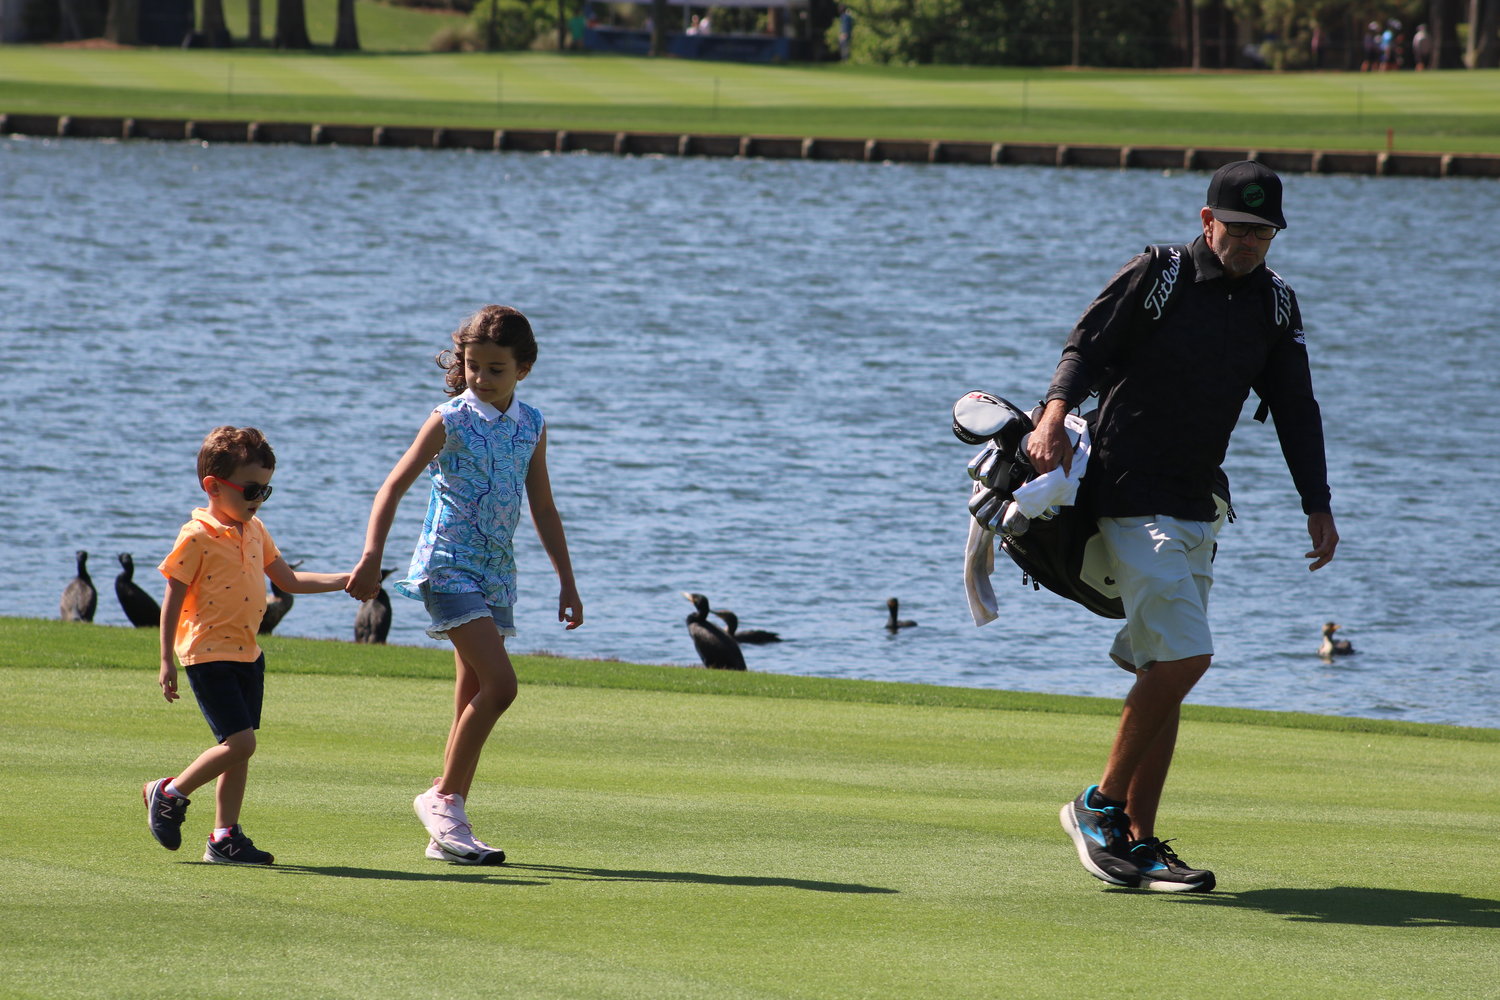 Caddies got to spend time with their families.